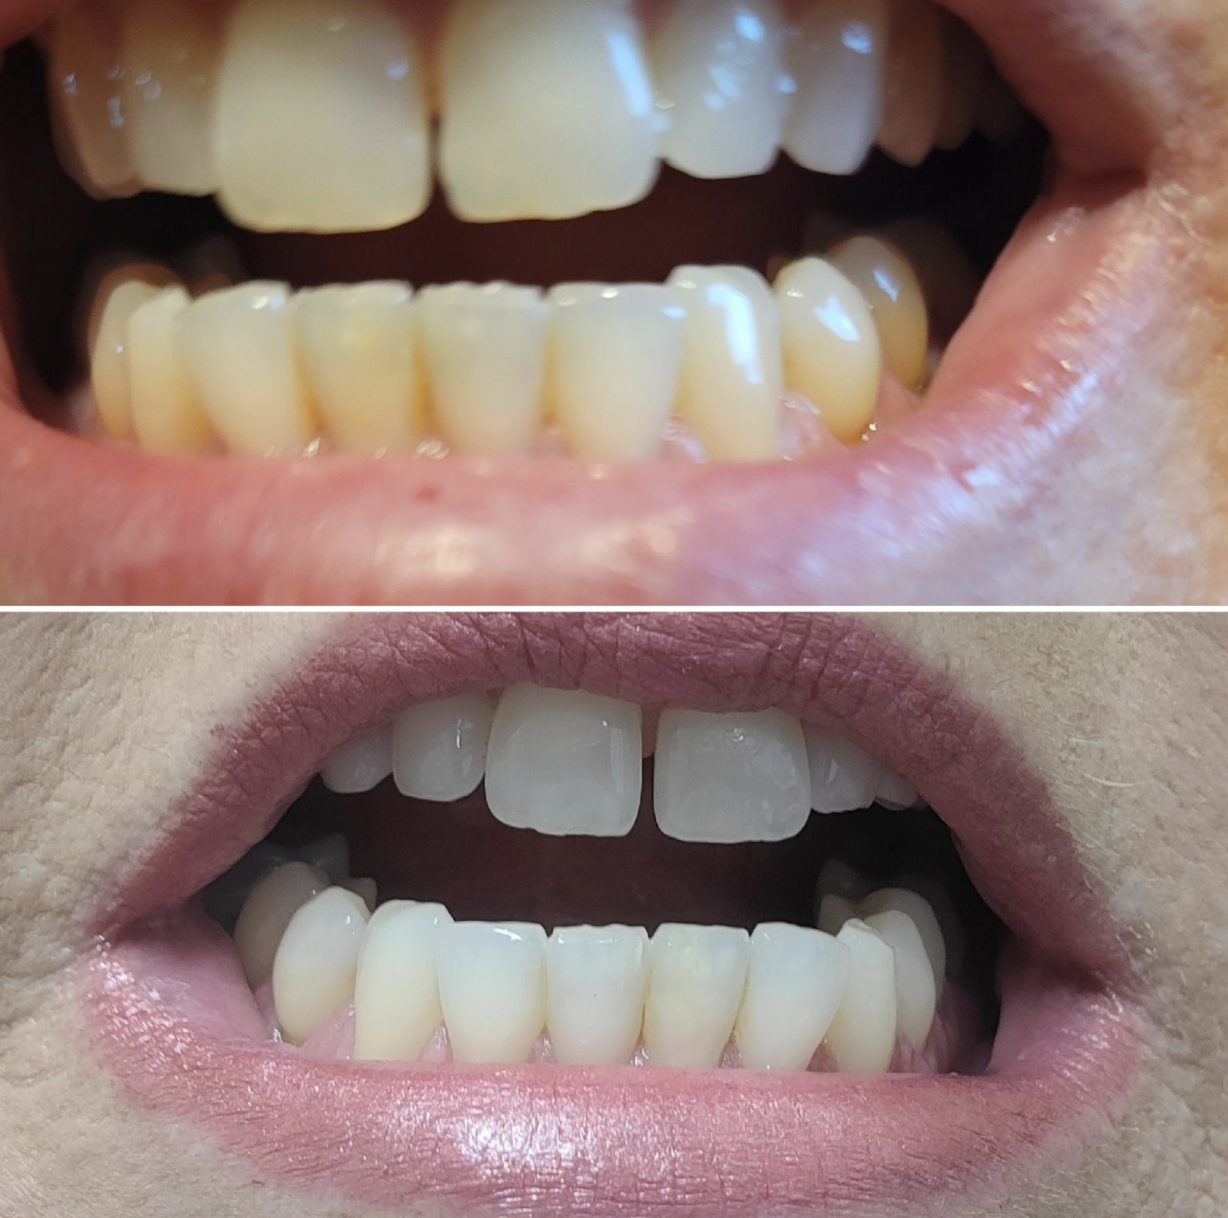 reviewer's photos showing before and after images of yellow and then whiter teeth